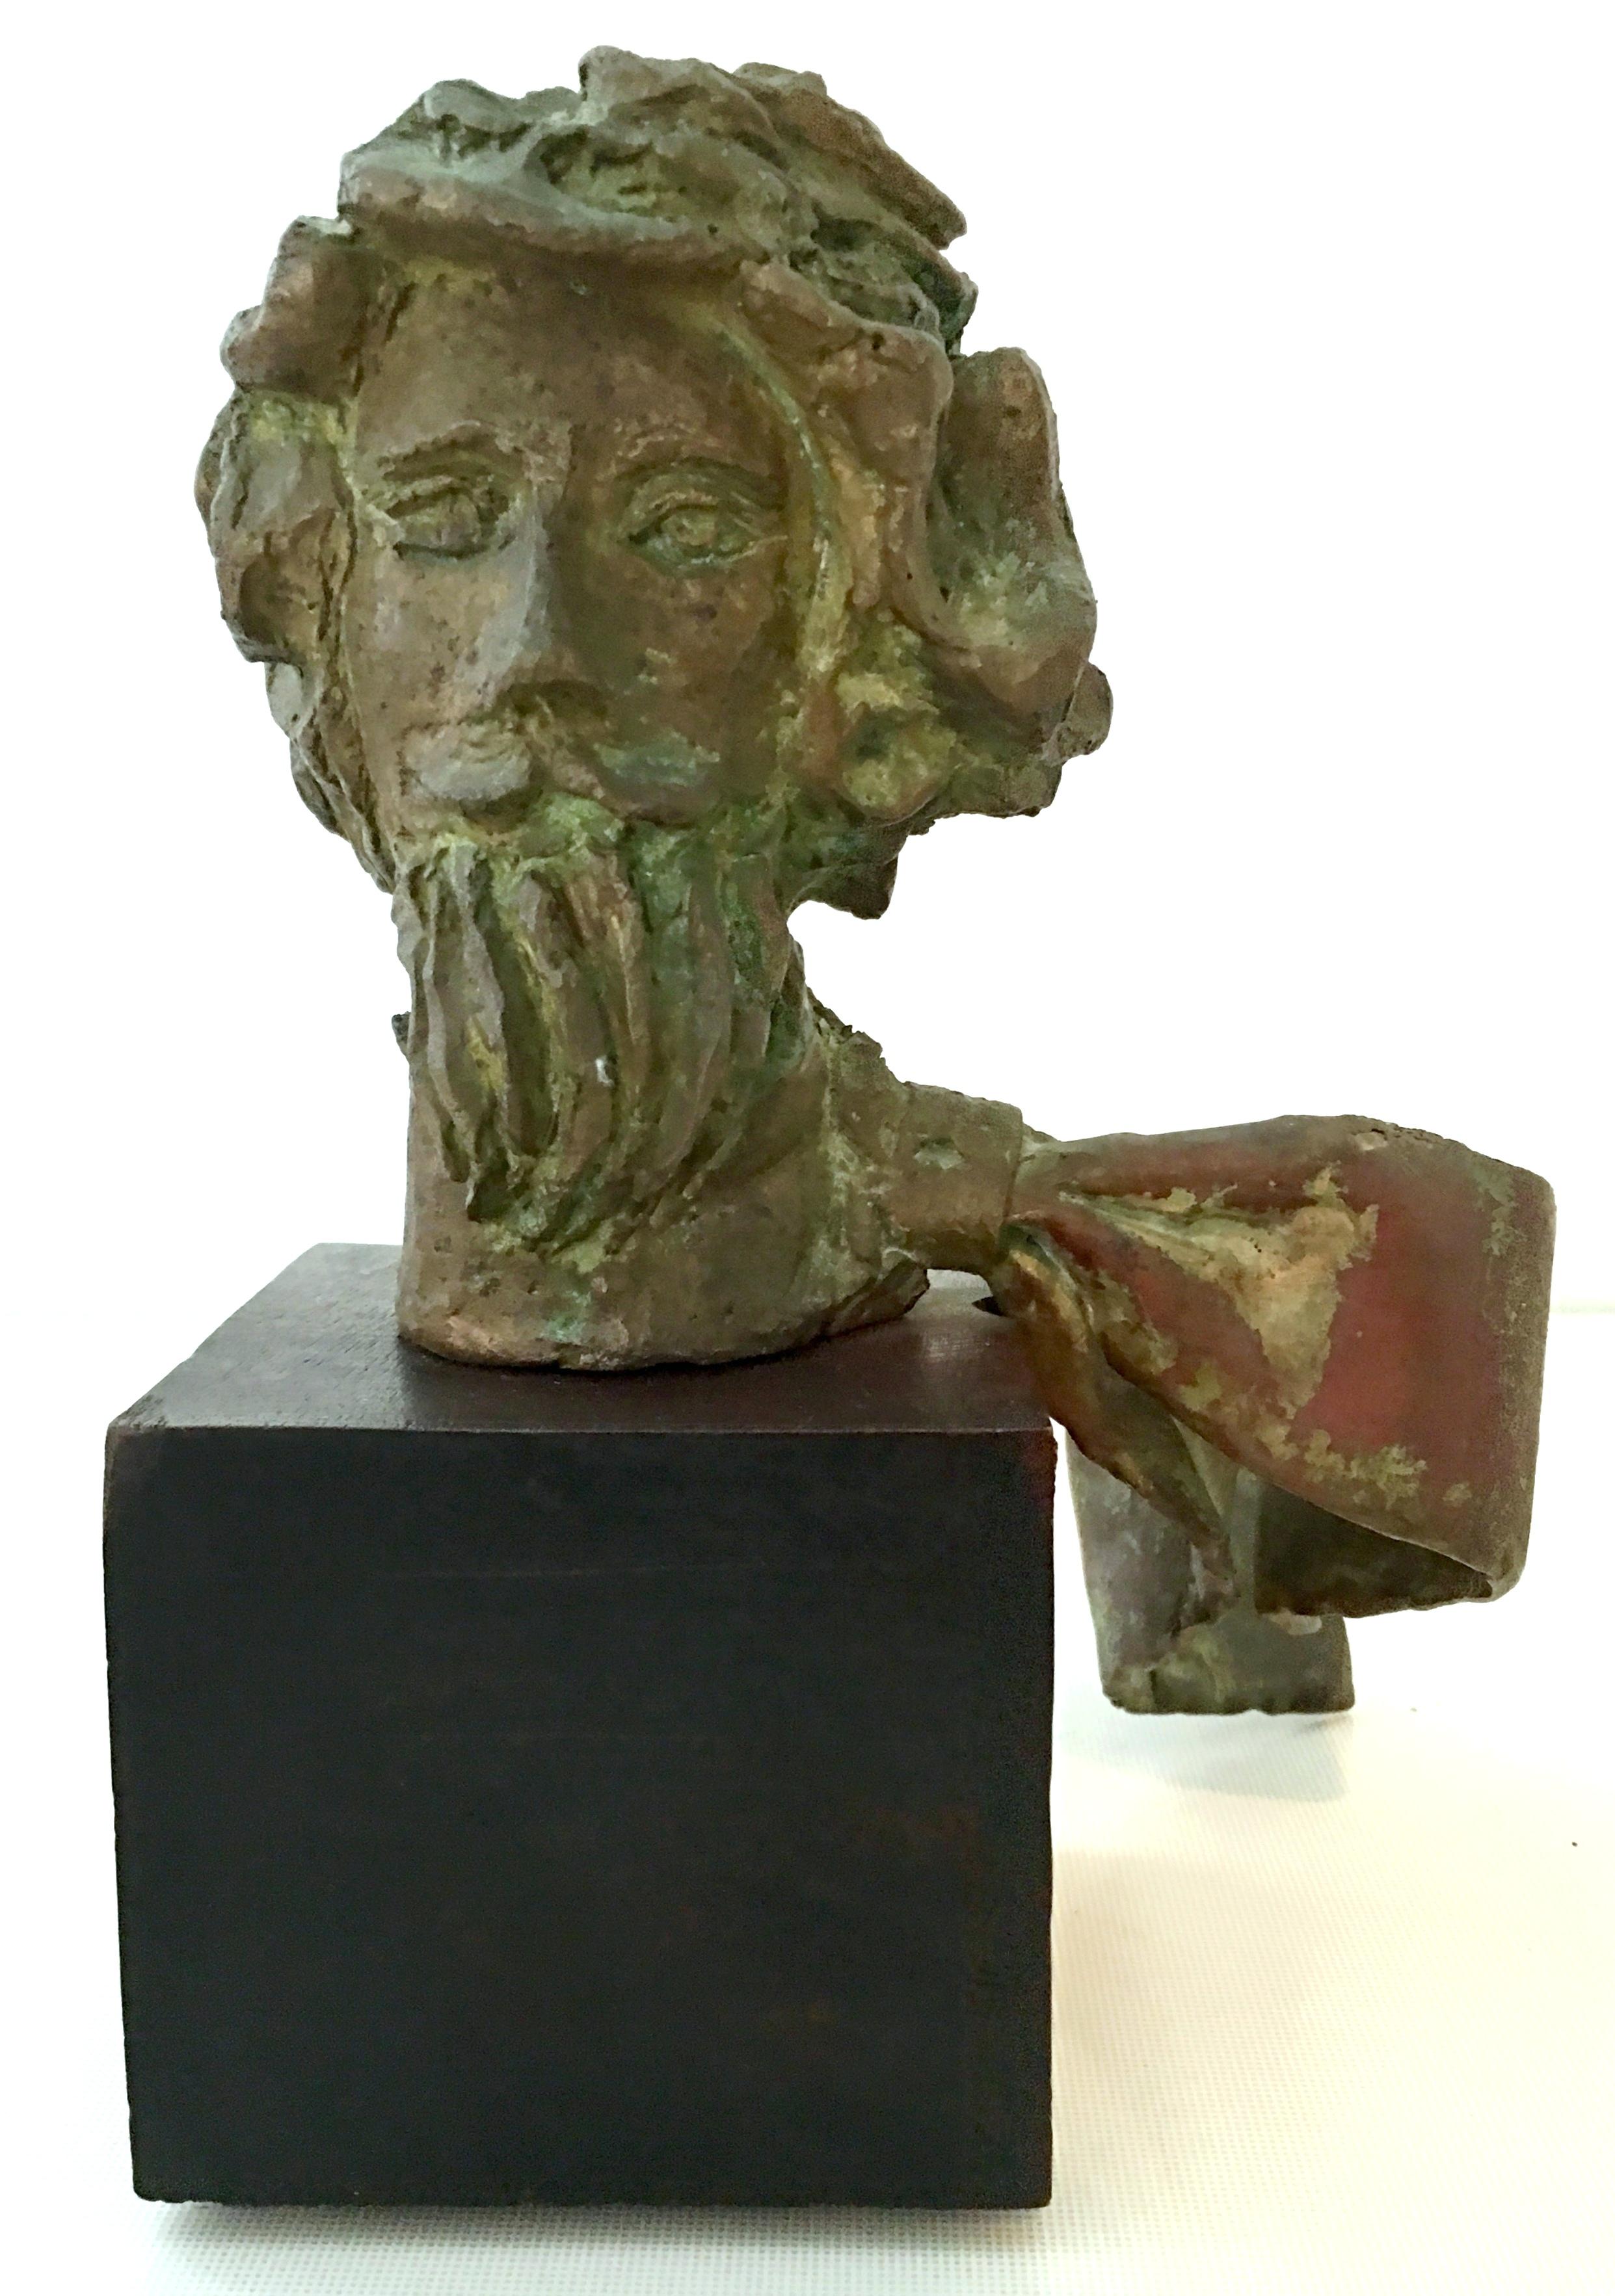 1969 Cast bronze male bust sculpture By, Adickes. One of a kind and rare bronze verdigris male bust sculpture, mounted on a stained mahogany square wood base. Features intricate detailed male bearded form with curly hair and incredible scarf in